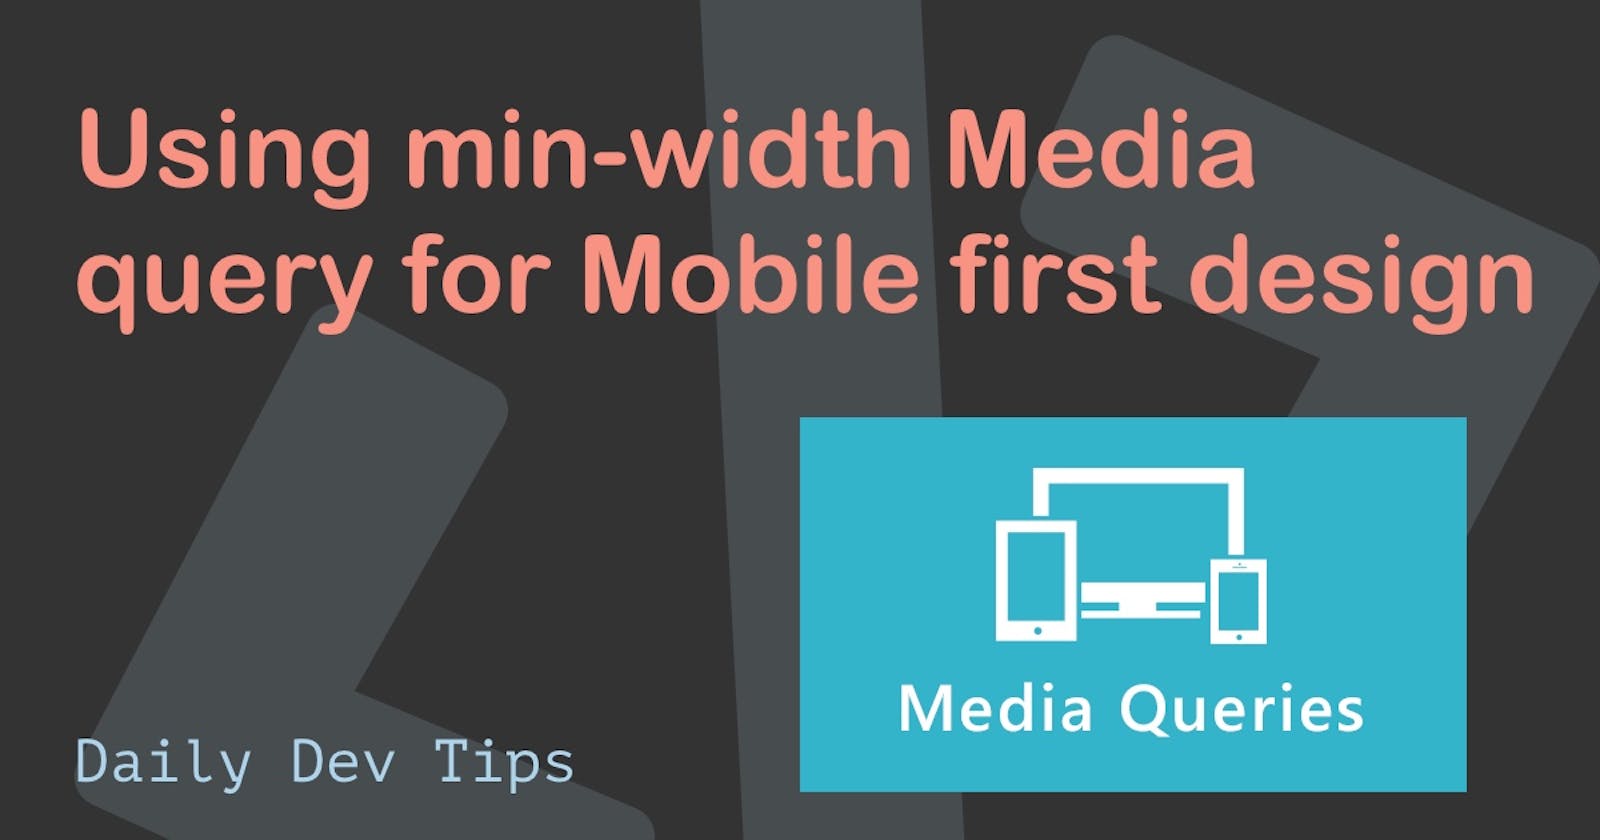 Using min-width Media query for Mobile first design